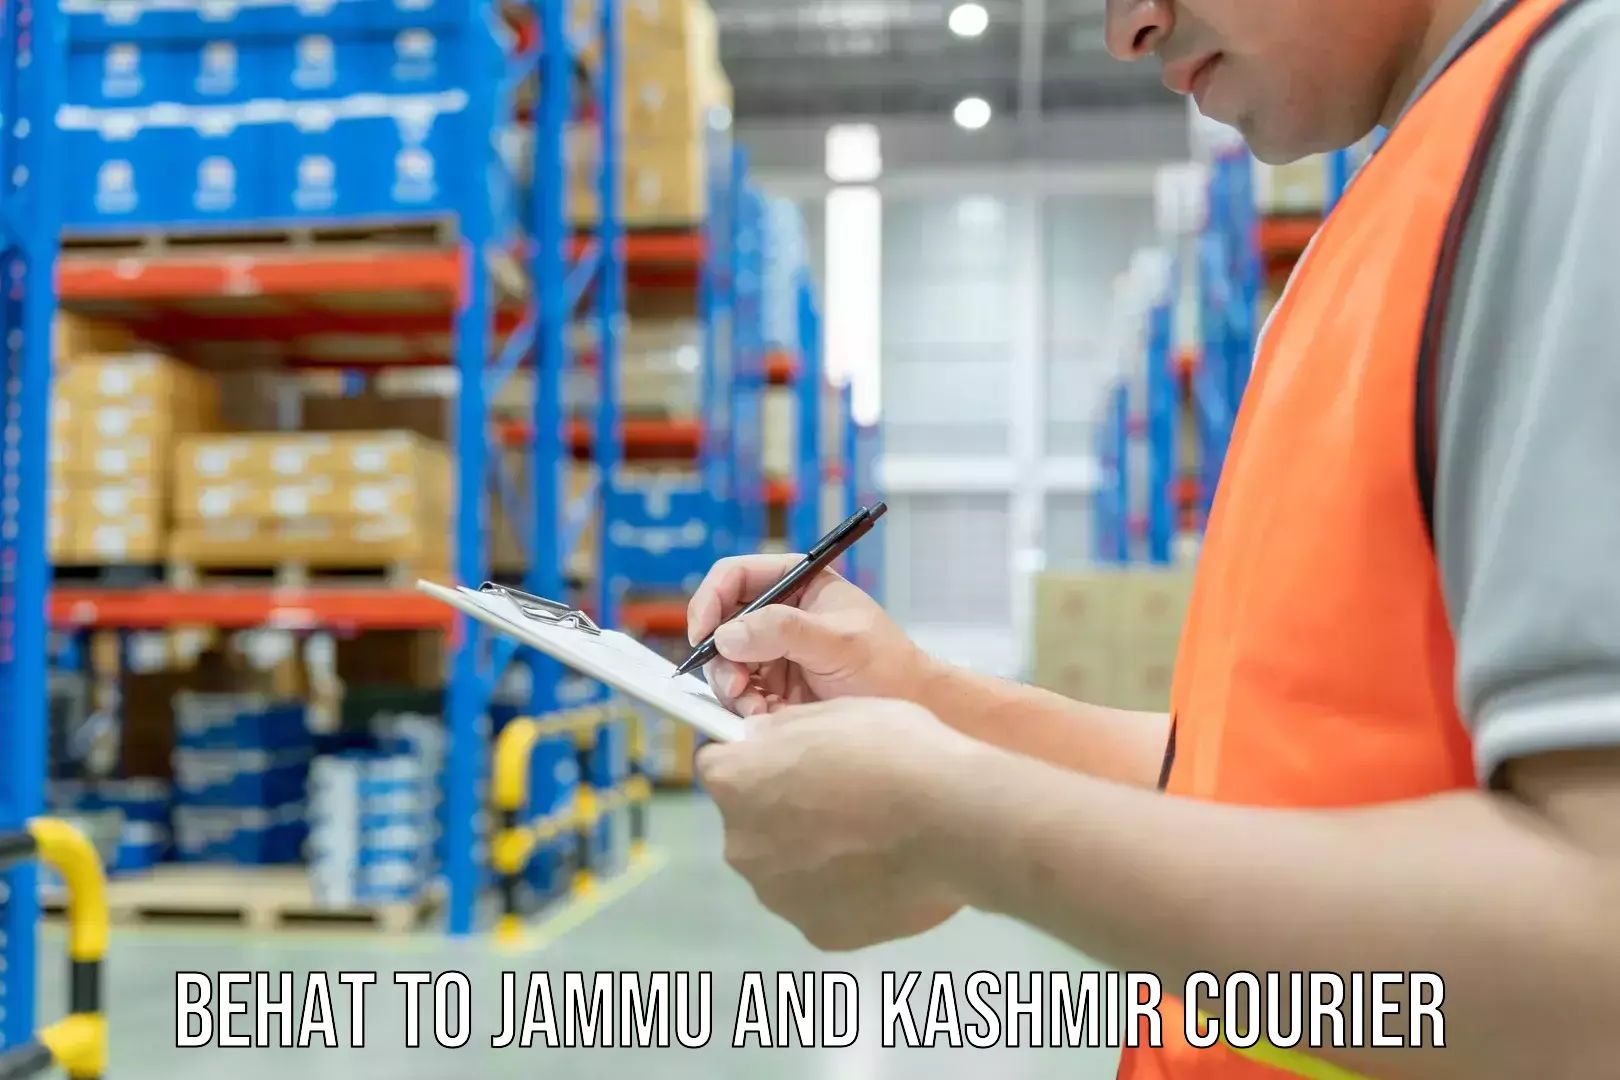 Cash on delivery service Behat to Jammu and Kashmir